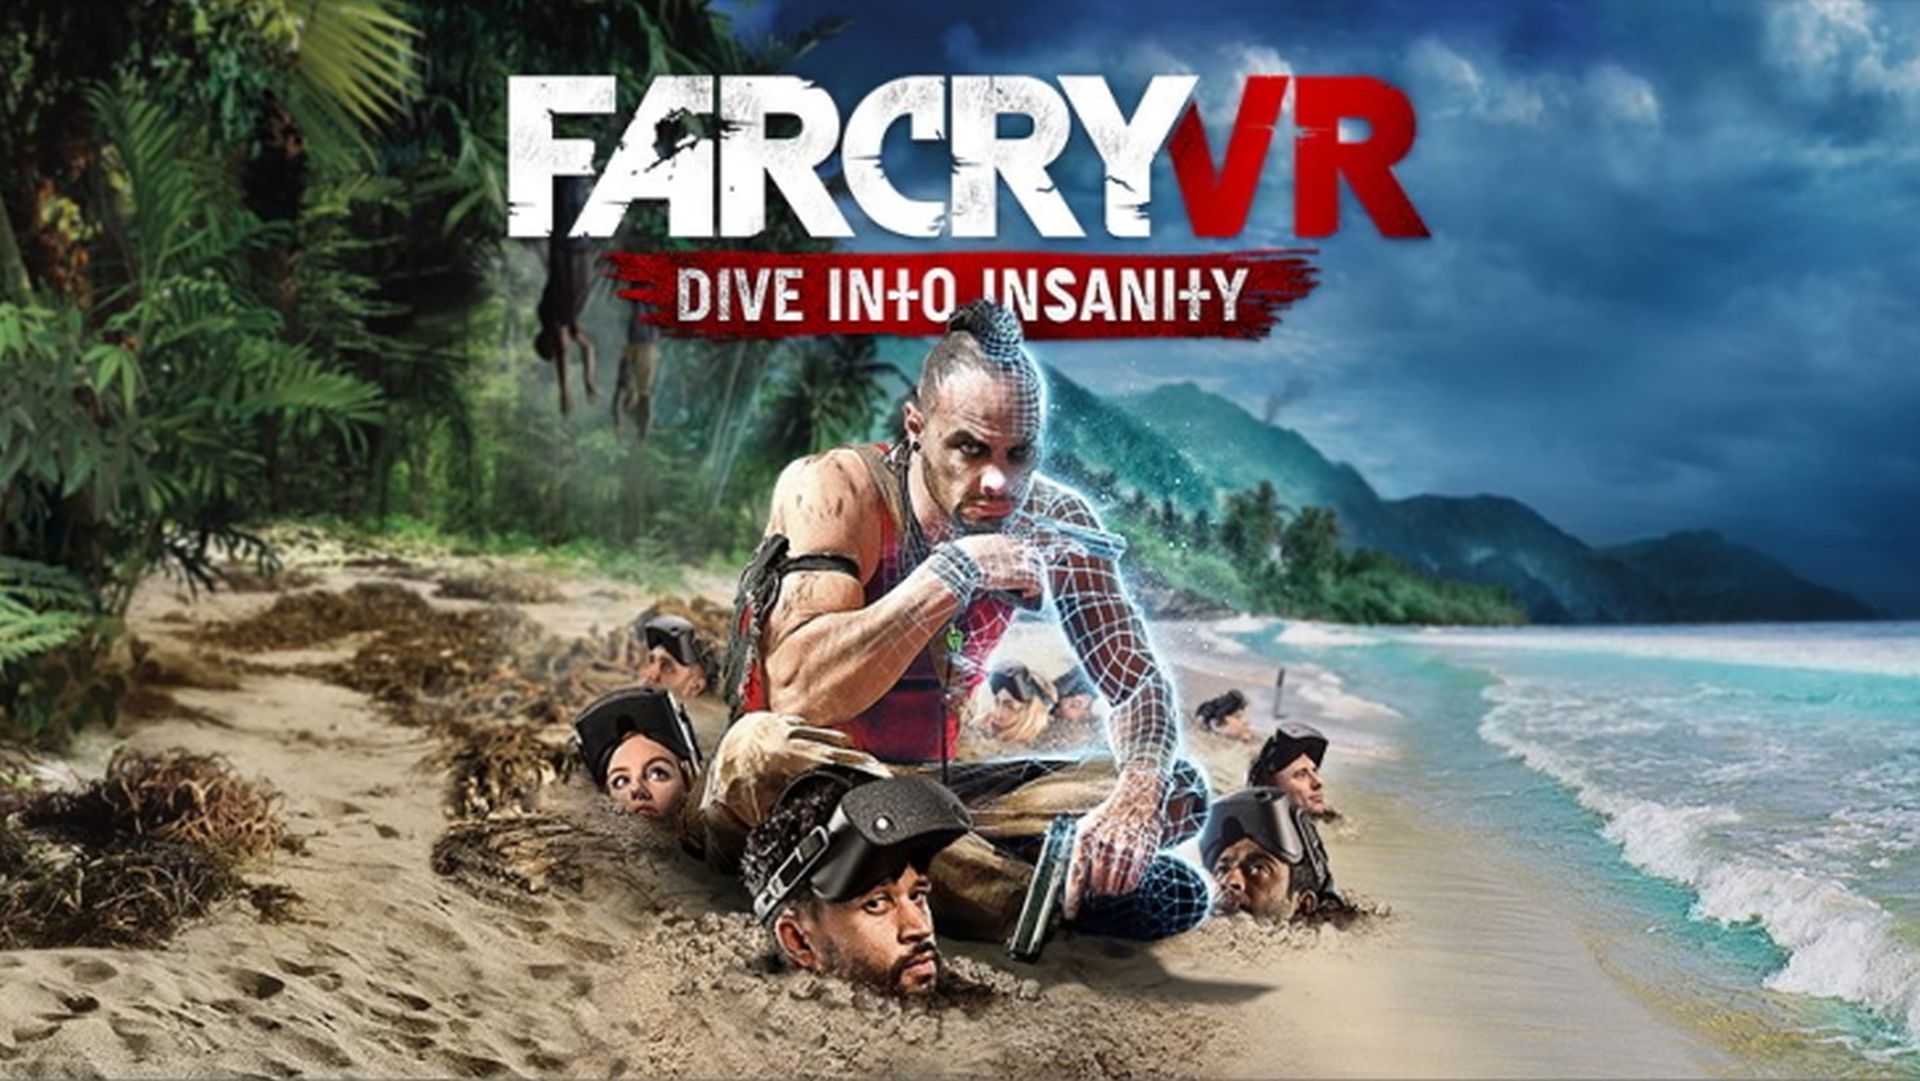 Far Cry Vr Dive Insanity